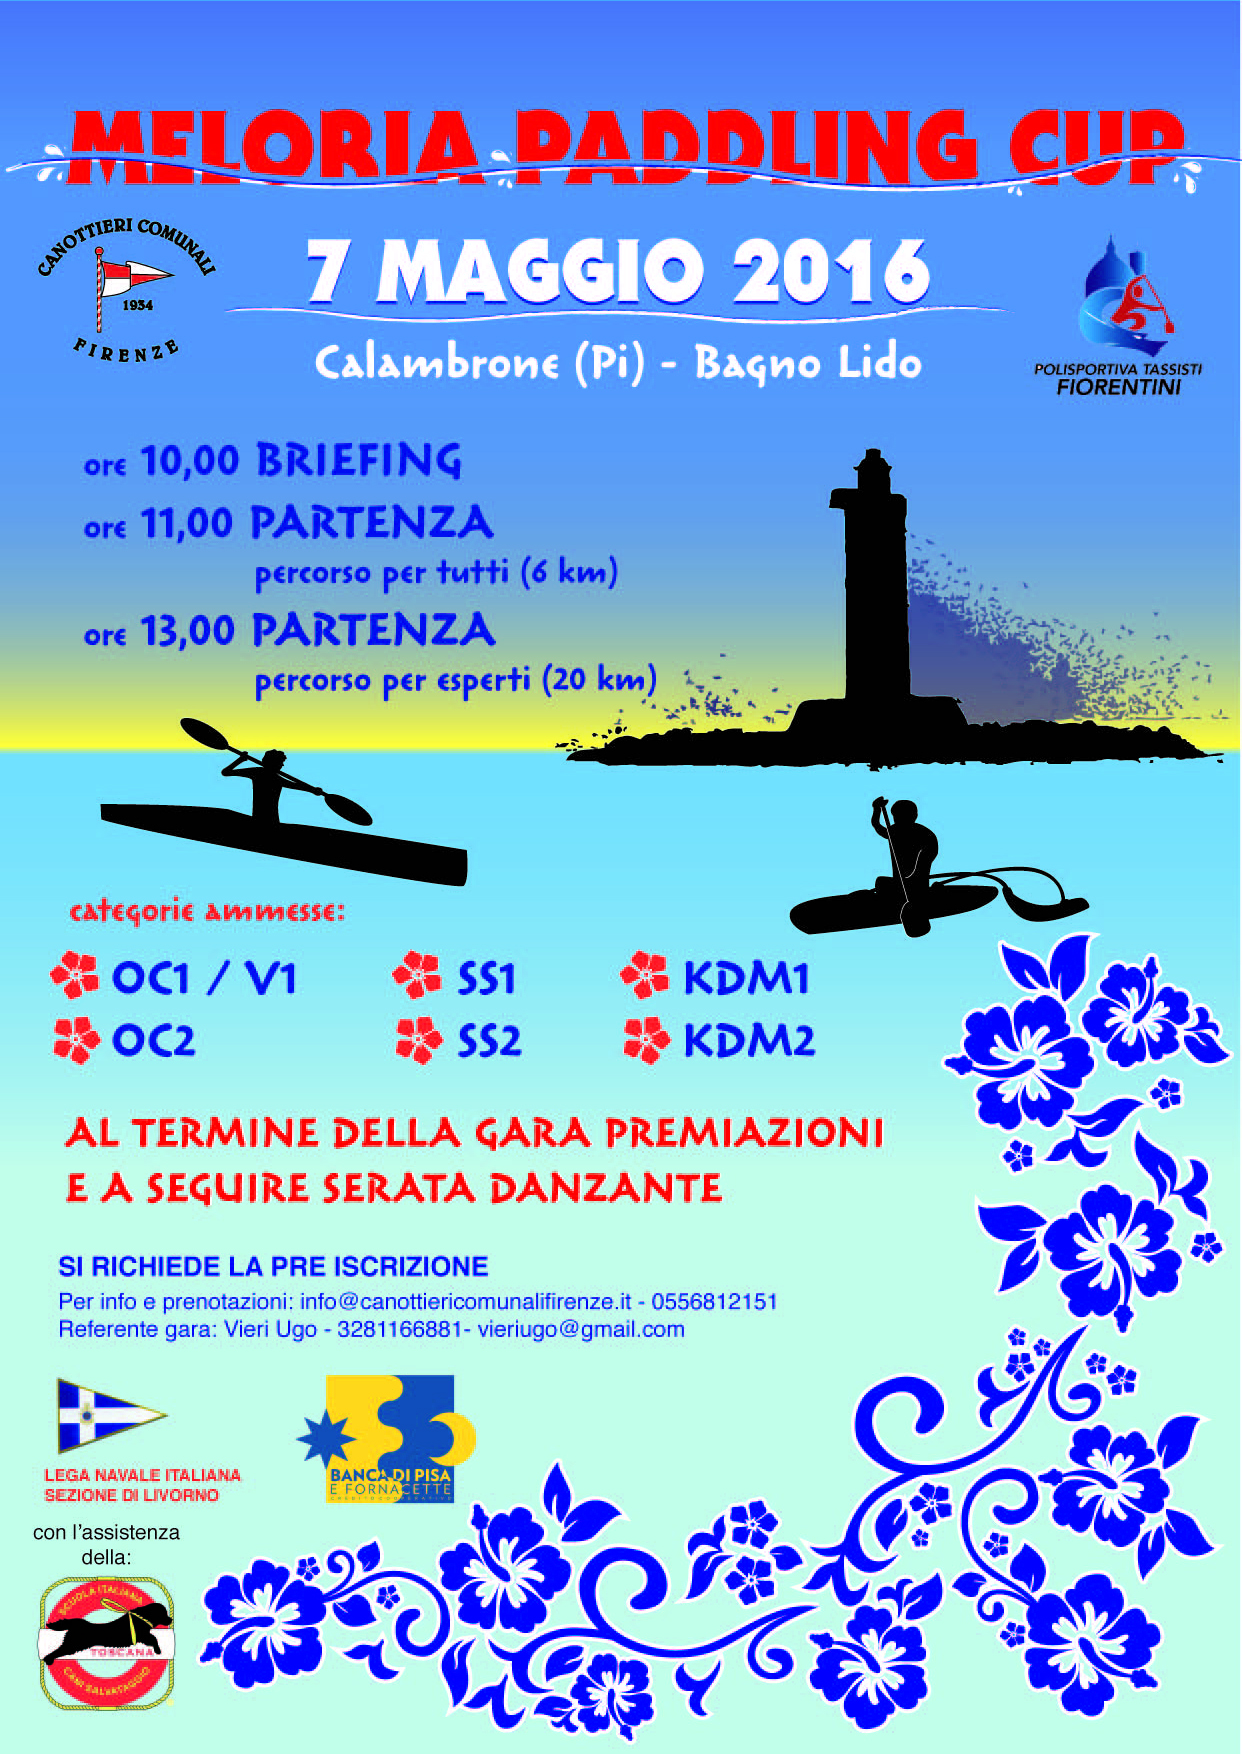 Meloria Paddling Cup 2016